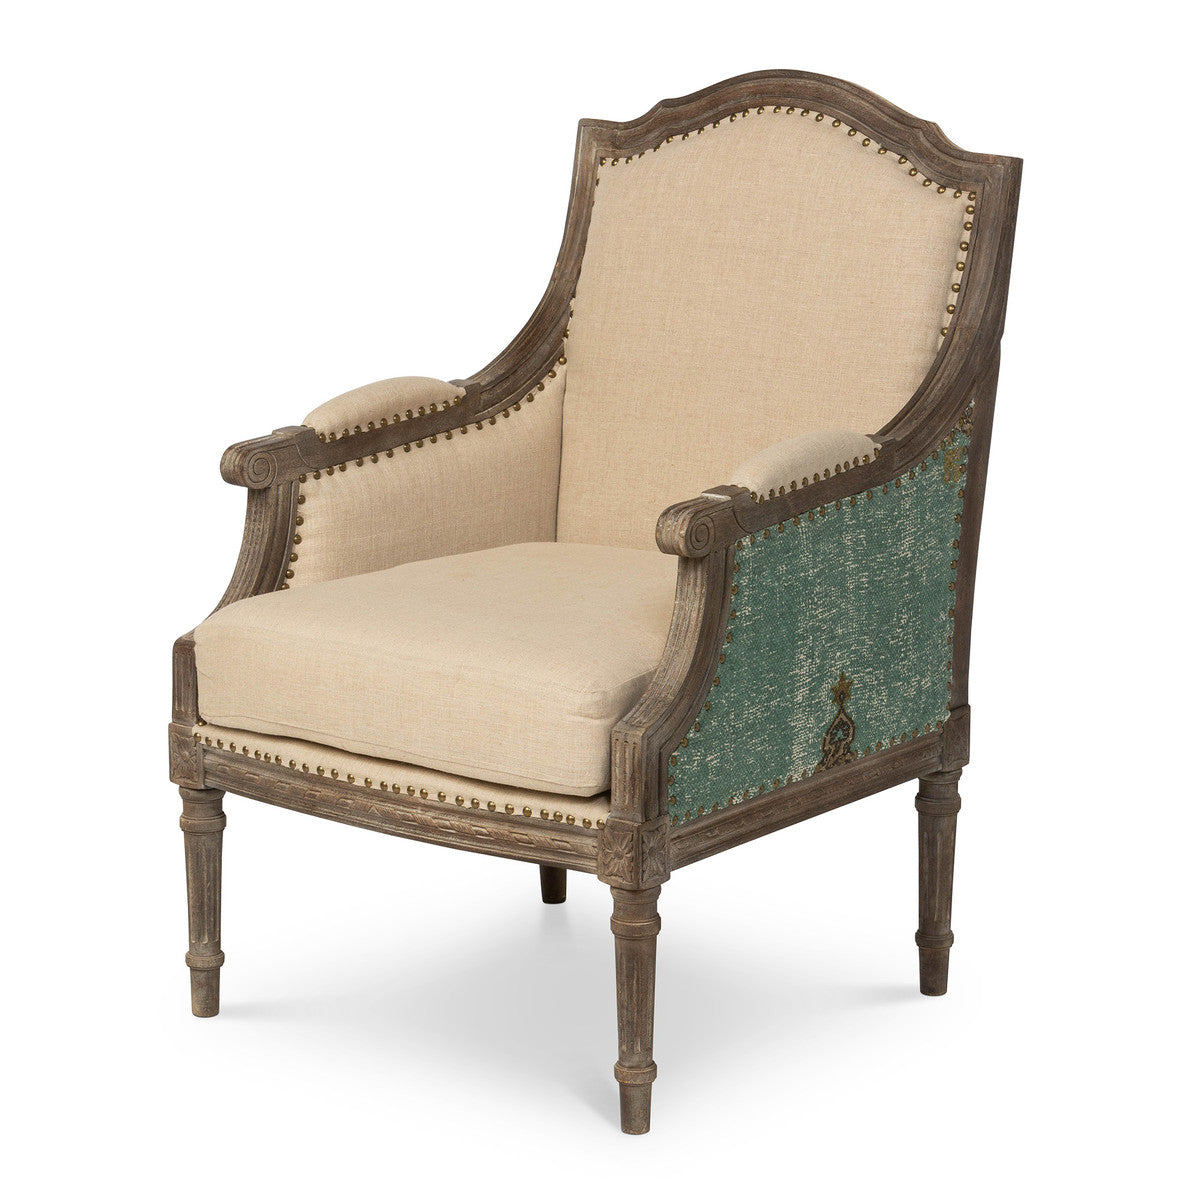 Simone Upholstered Arm Chair - Online Only